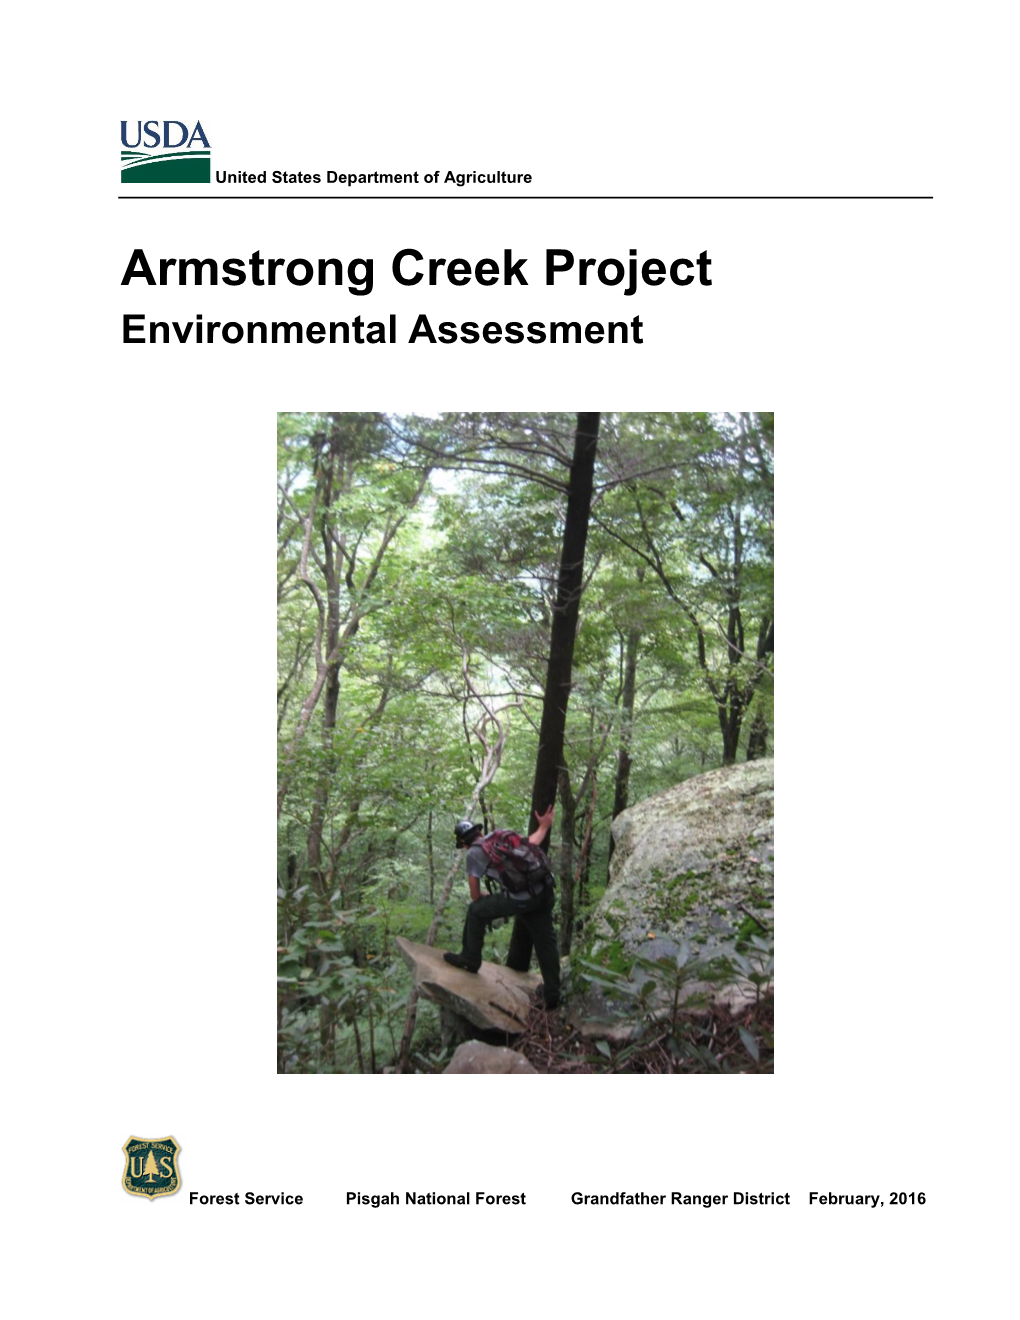 Armstrong Creek Project Environmental Assessment